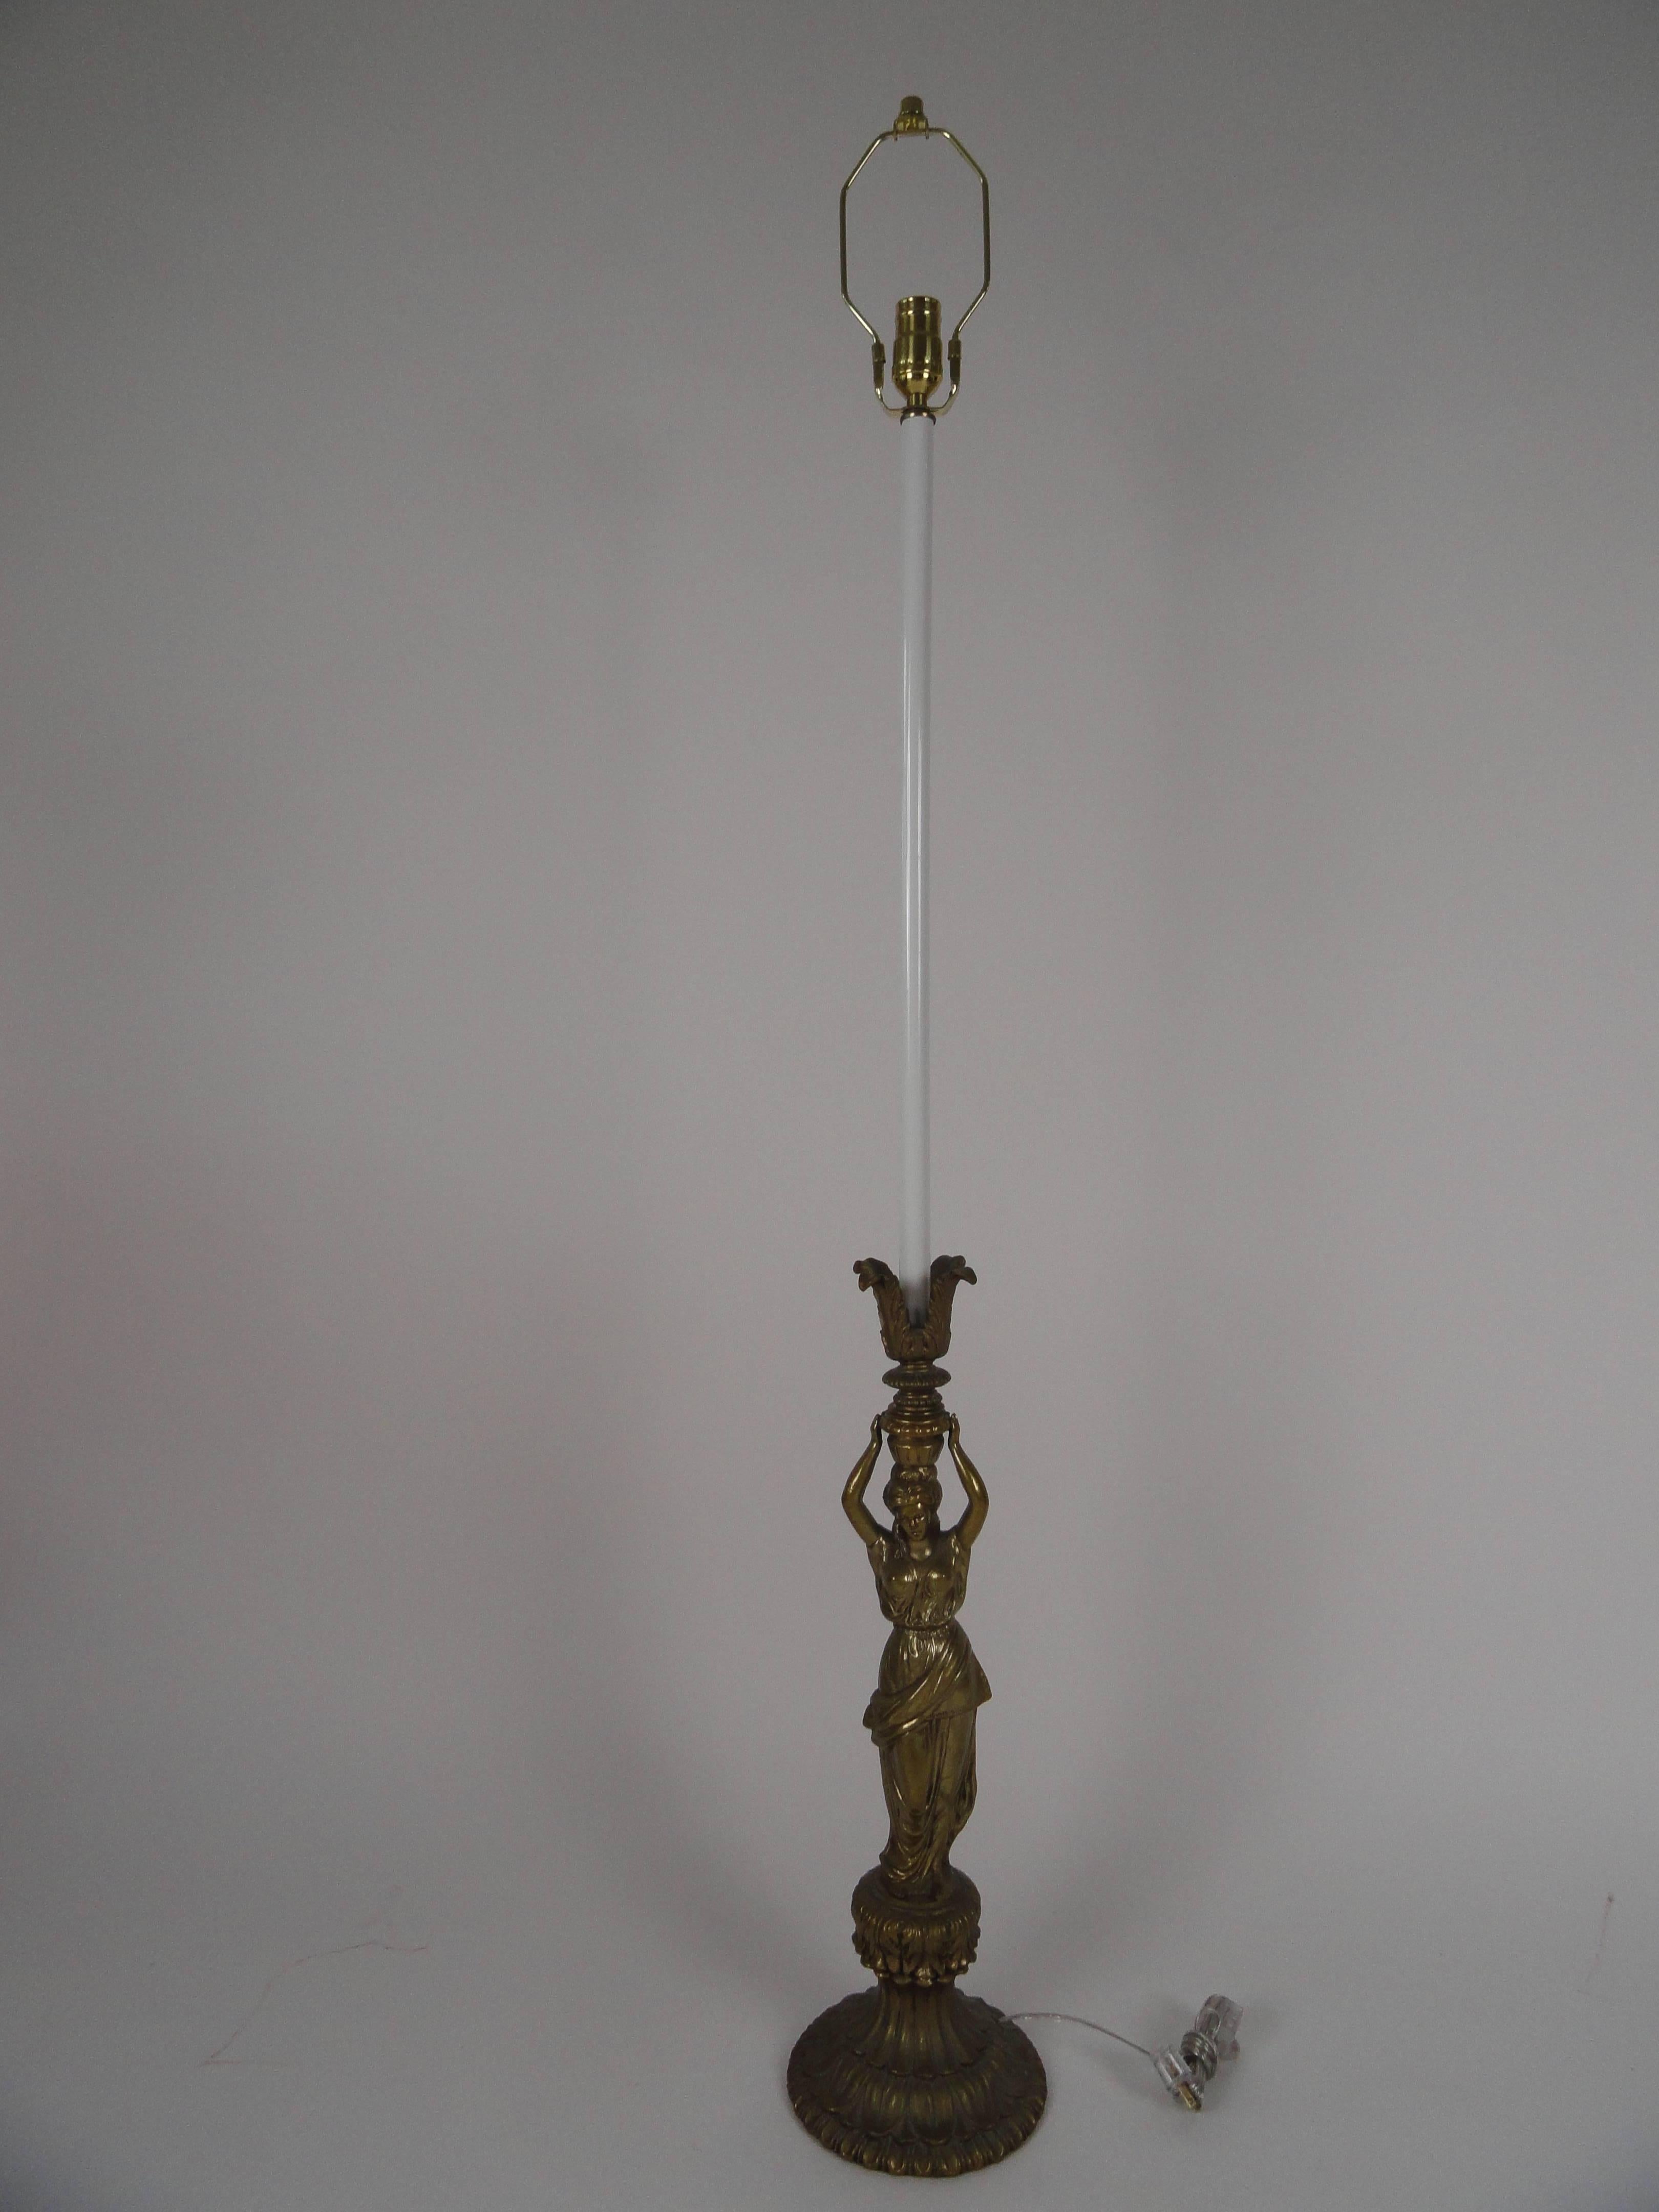 Neoclassical style metal female figure candlestick lamp. Rewired with inline switch. 
This is a tall lamp. Measures: height is 48